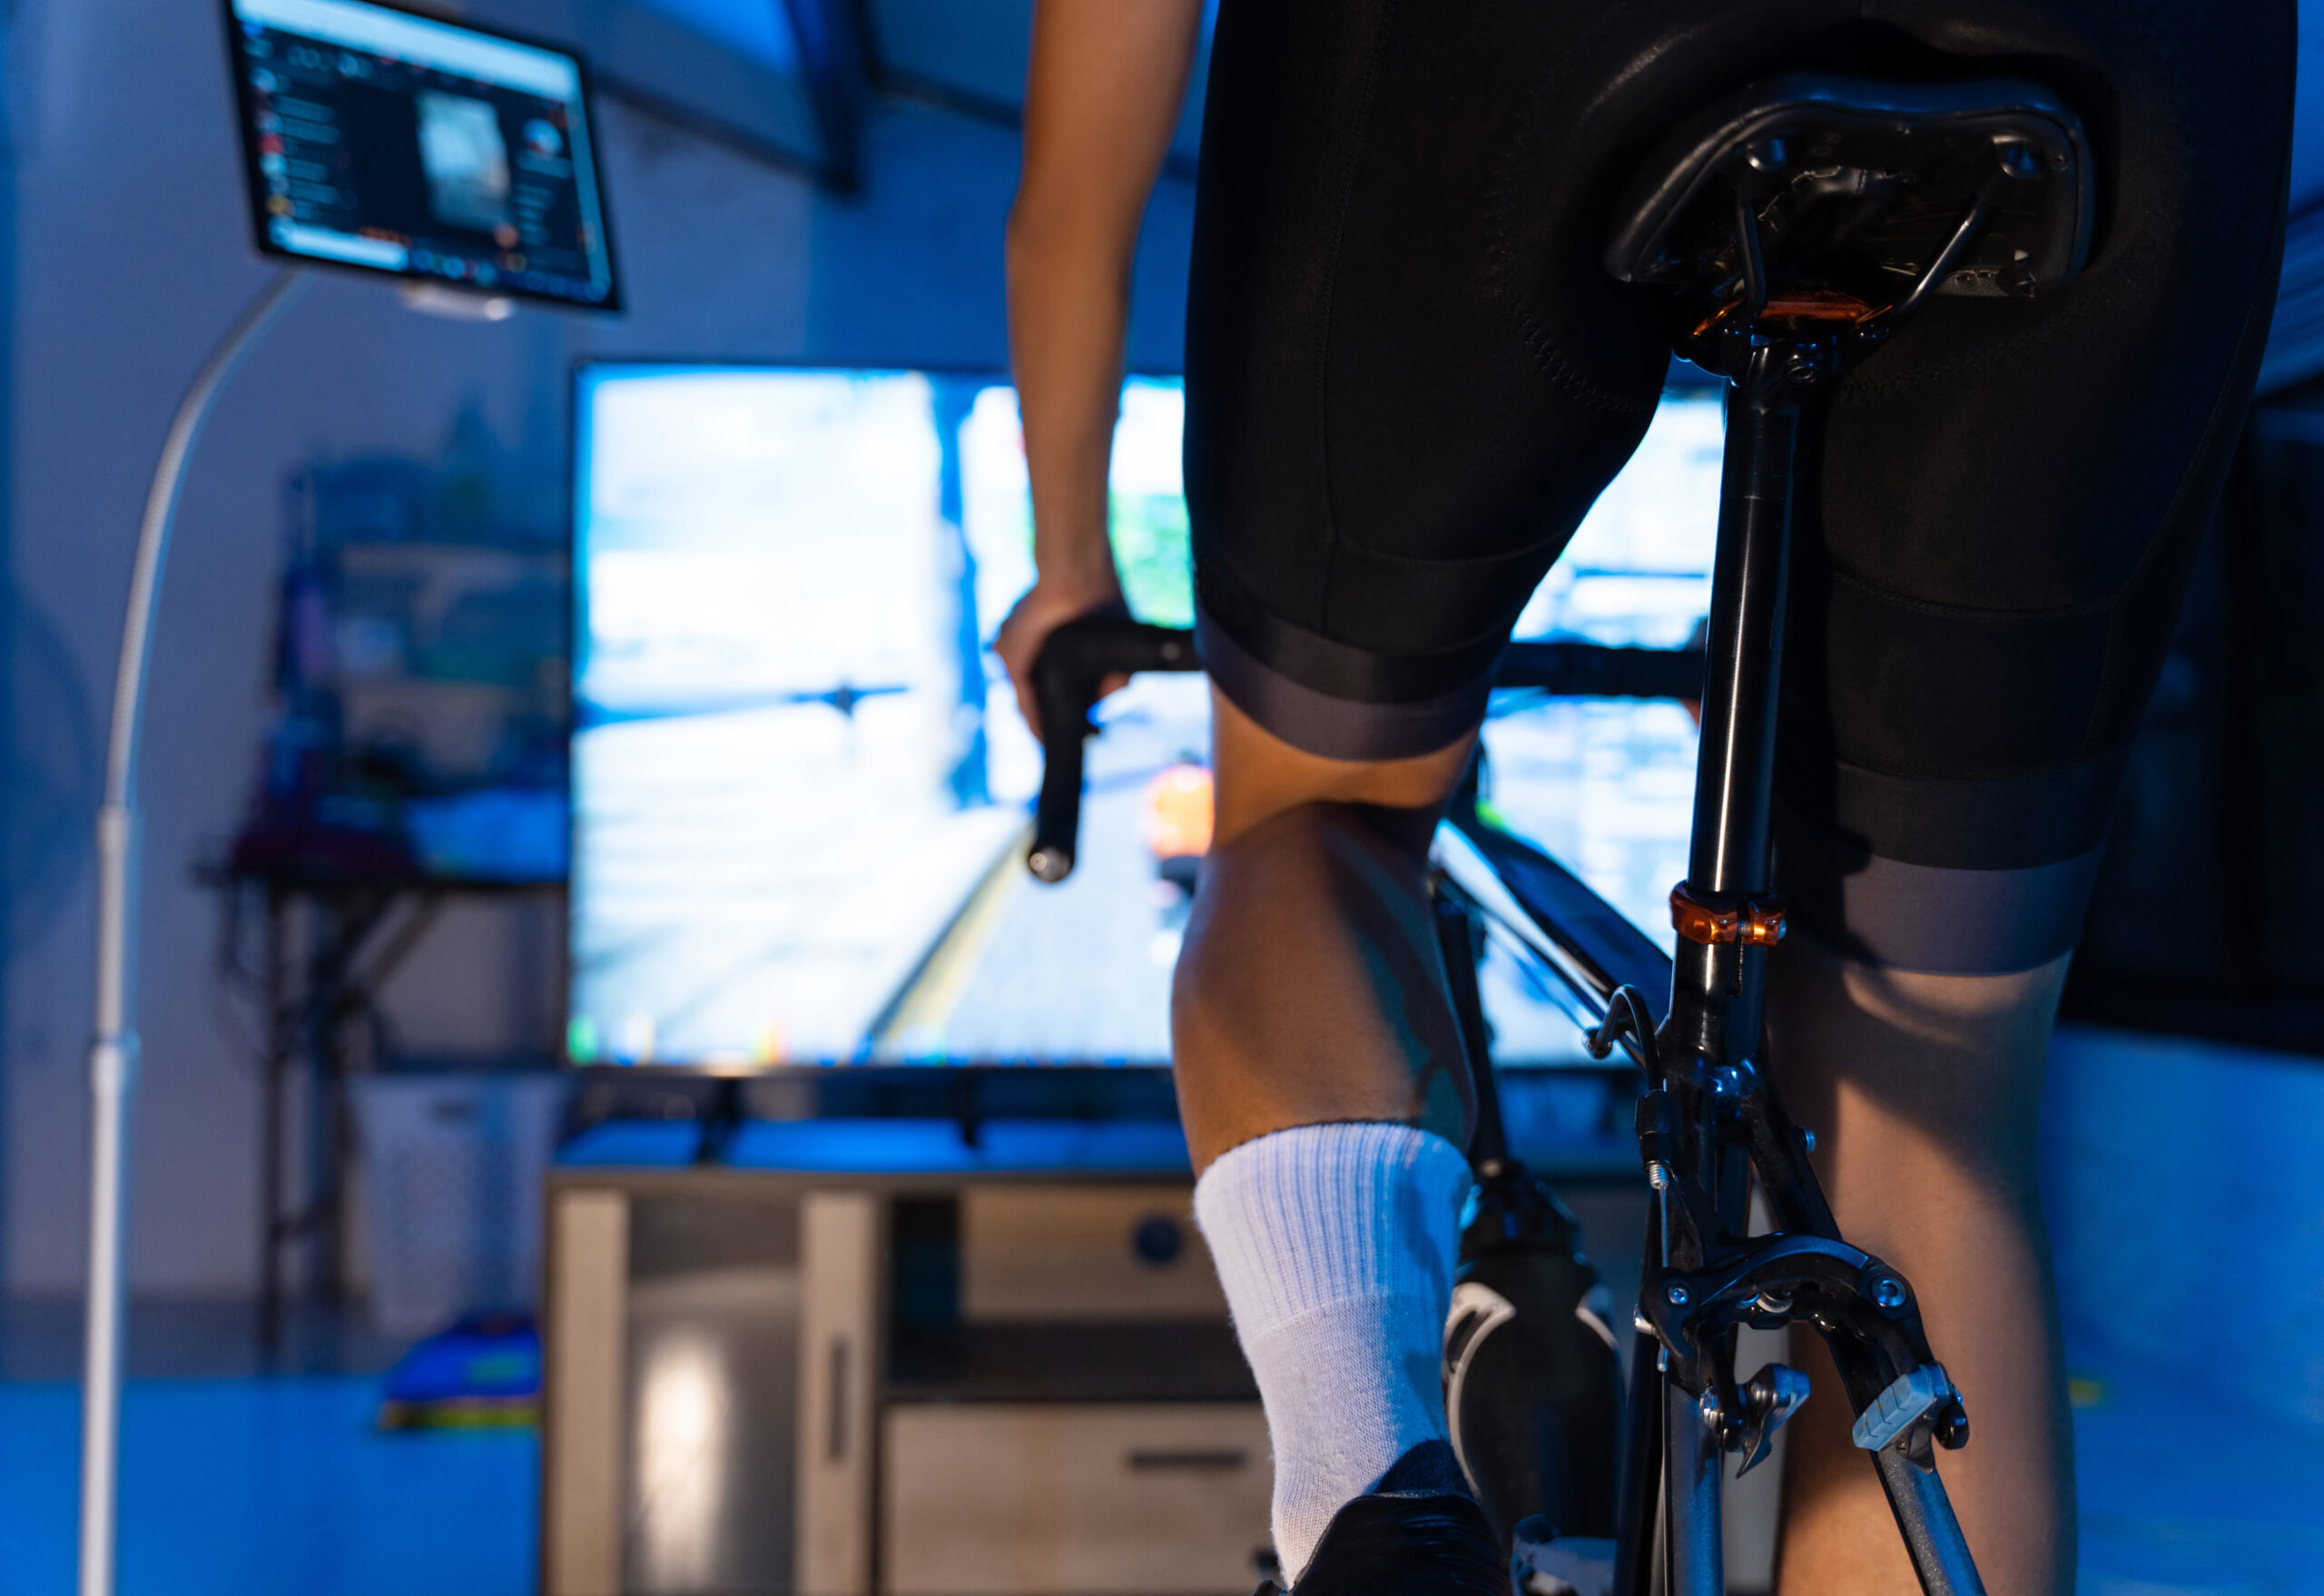 Indoor Cycling with VR